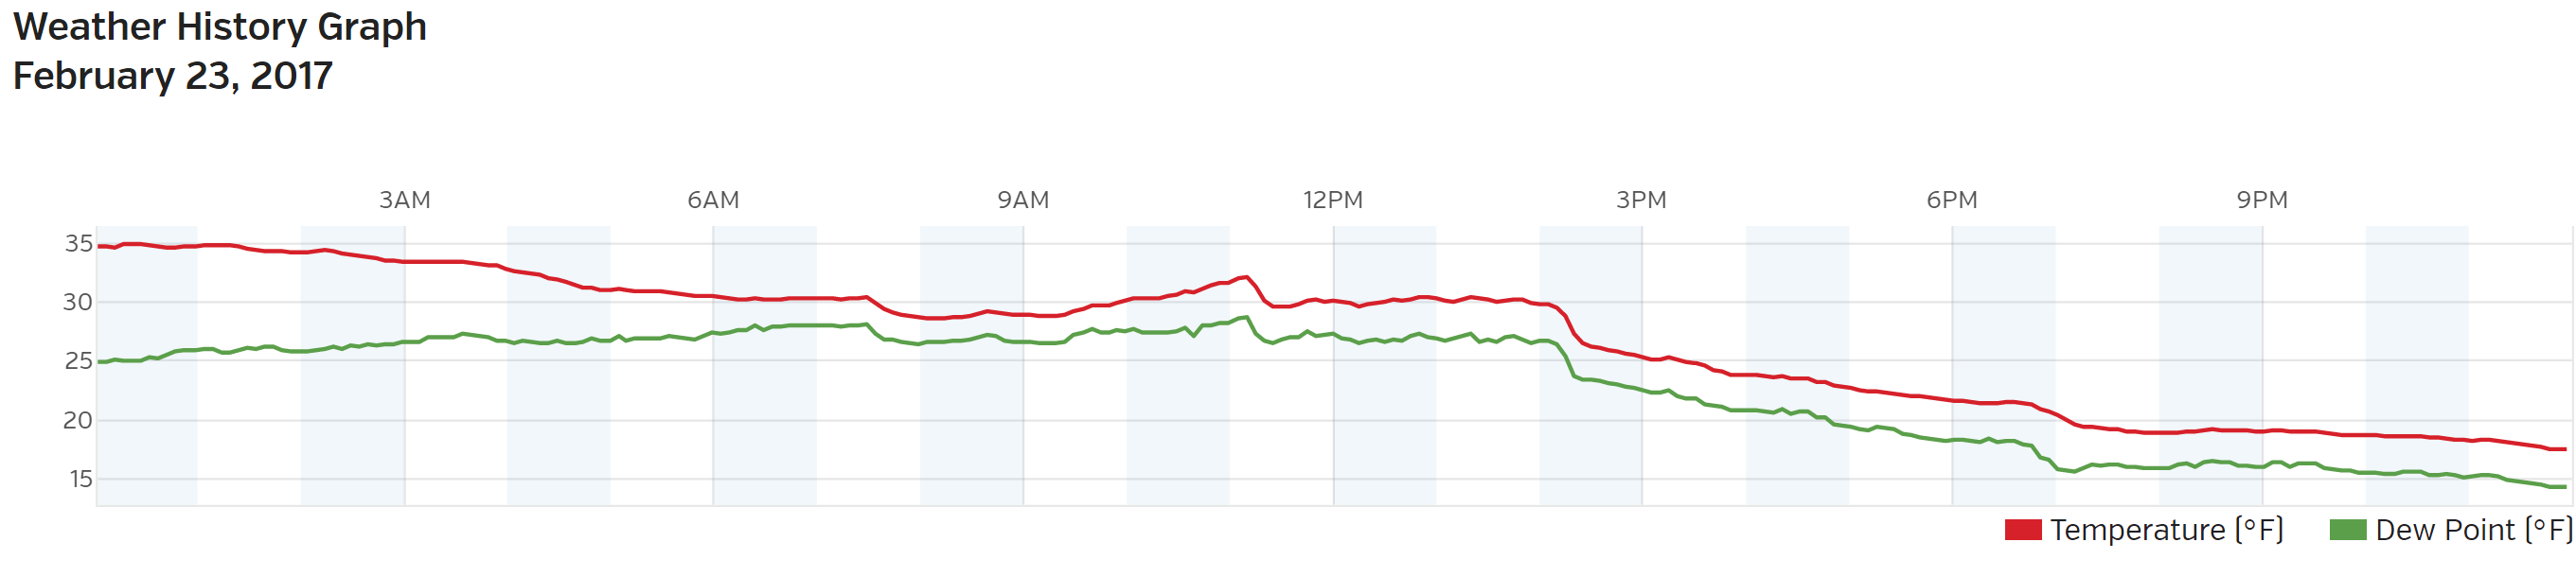 Temperature and dew point time series from BoulderCAST Station on Thursday, February 23rd.